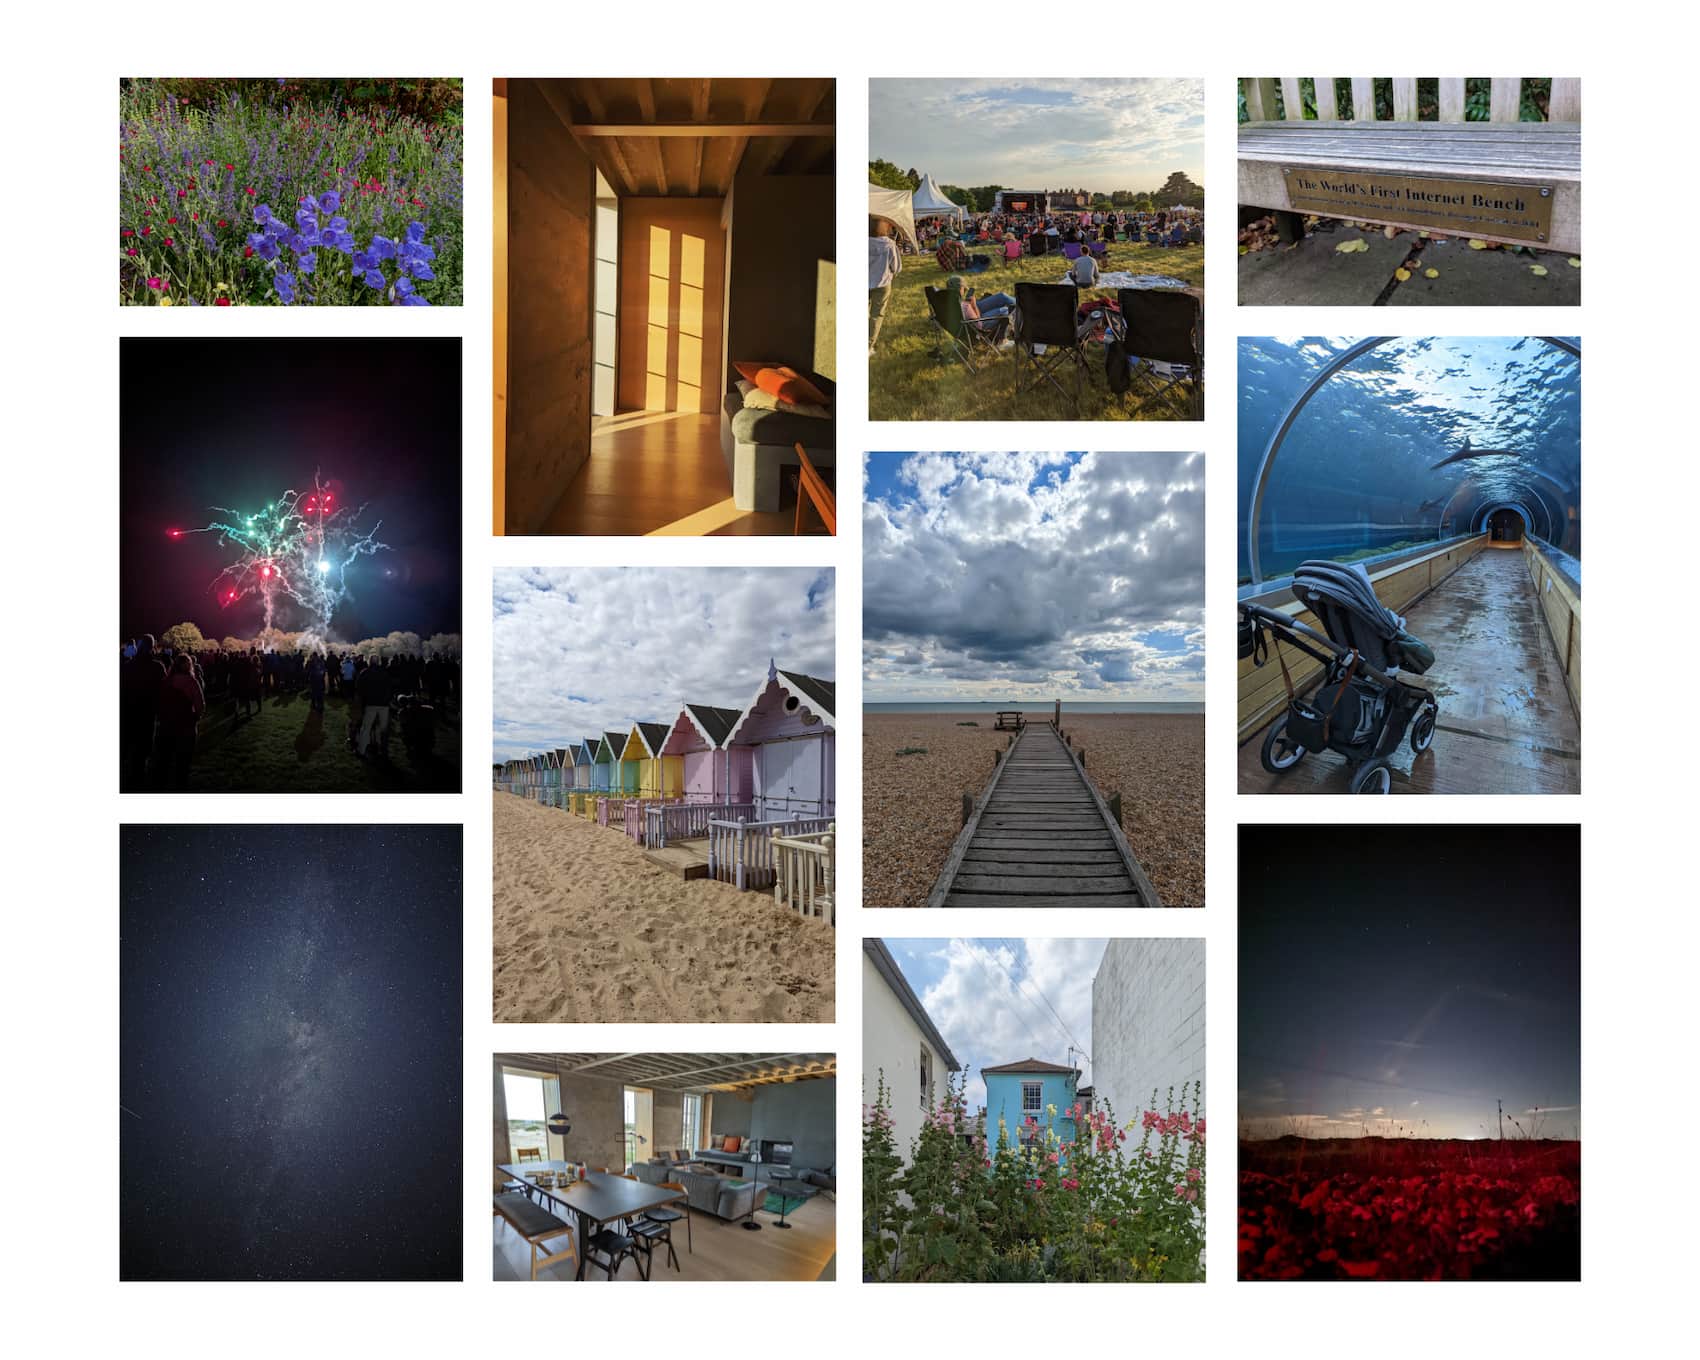 A collection of photos from adventures, including plants, fireworks, the night sky, pastel beach huts, modern interiors, a festival, sealion tunnel, and seaside.